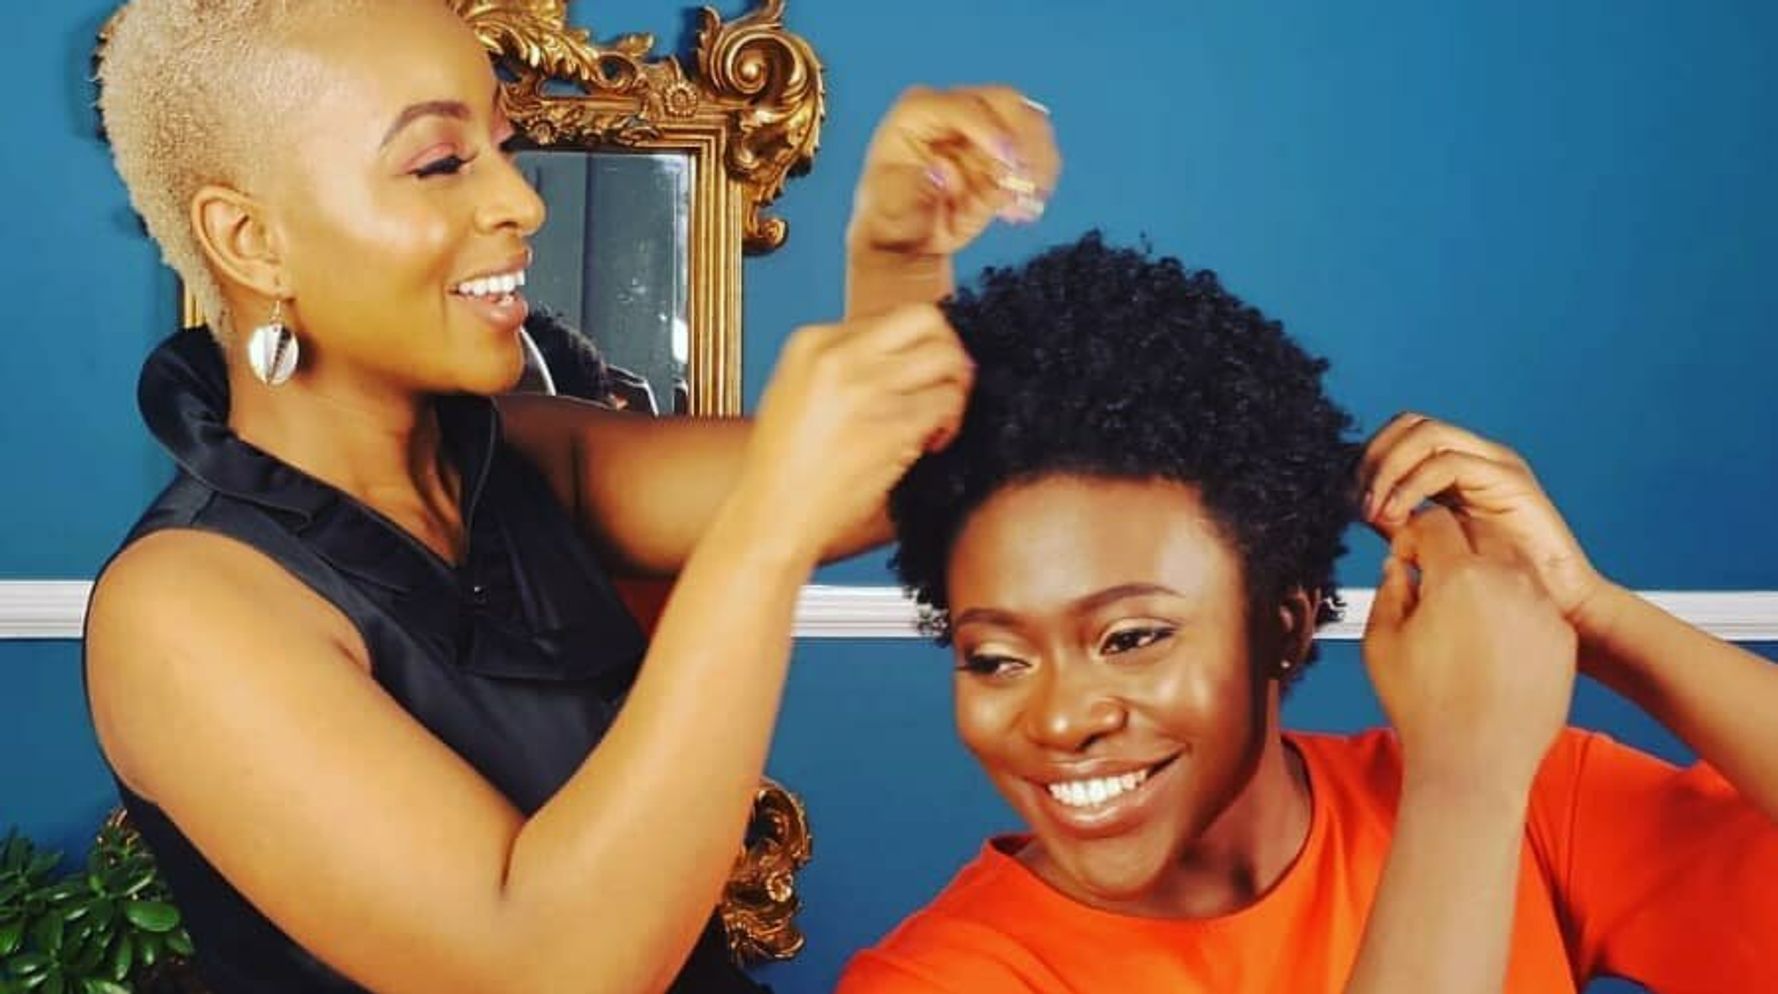 More Than A Haircut: Why Black Salons Are Needed More Than Ever After Lockdown